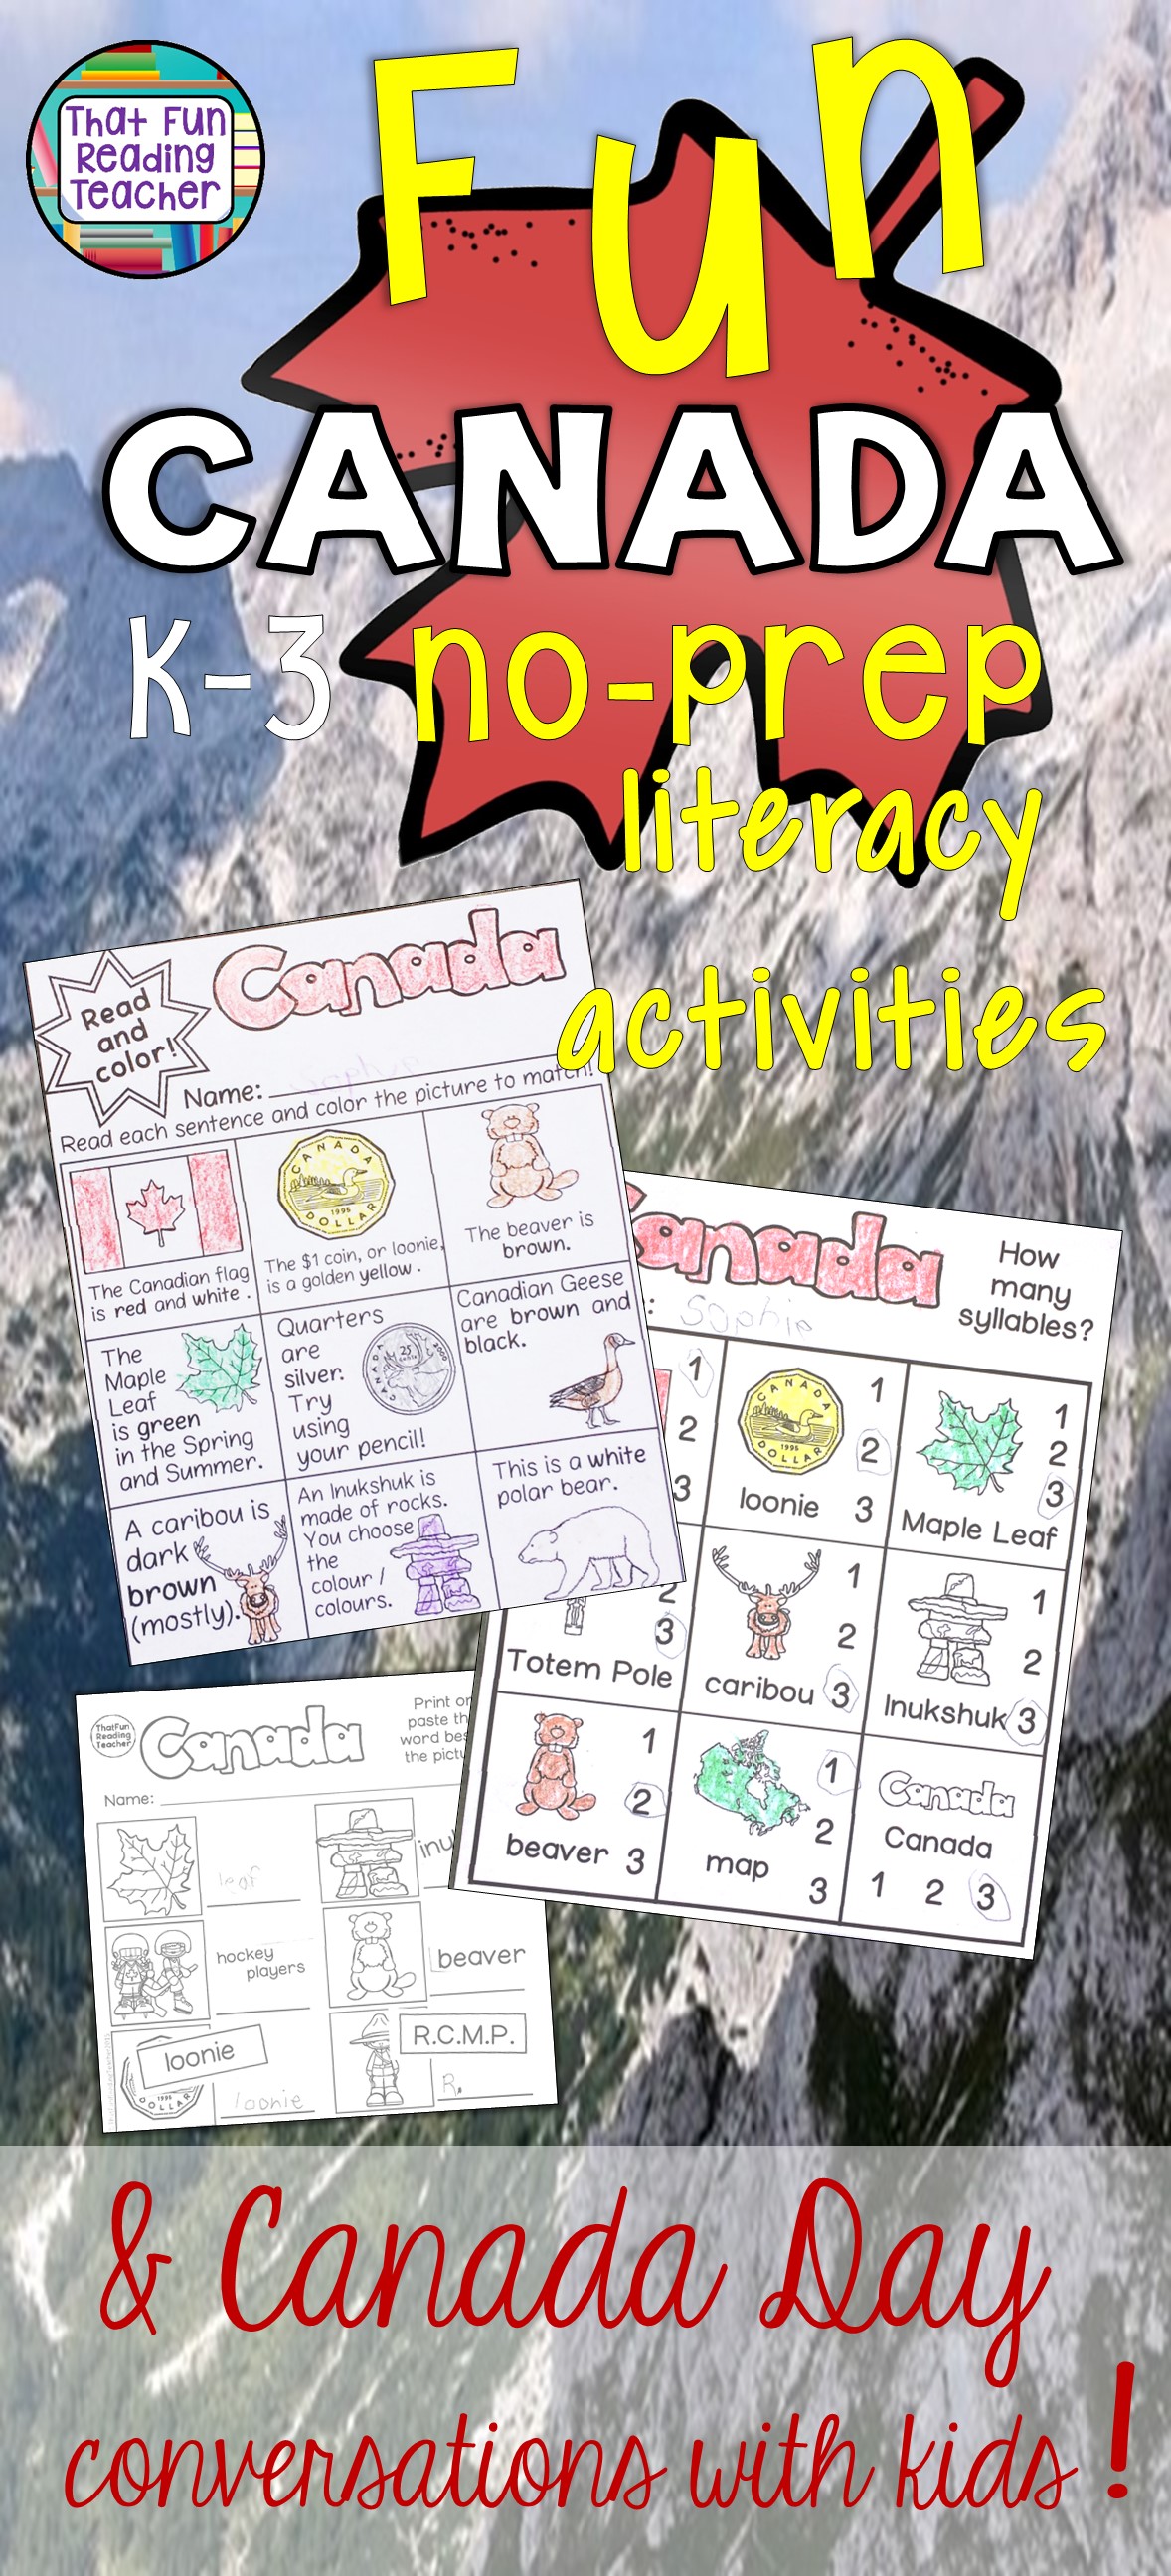 I like to discuss Canada Day with my students, and do some fun Canada-themed literacy skill review, vocabulary and writing activities. Check out this post for a peek!